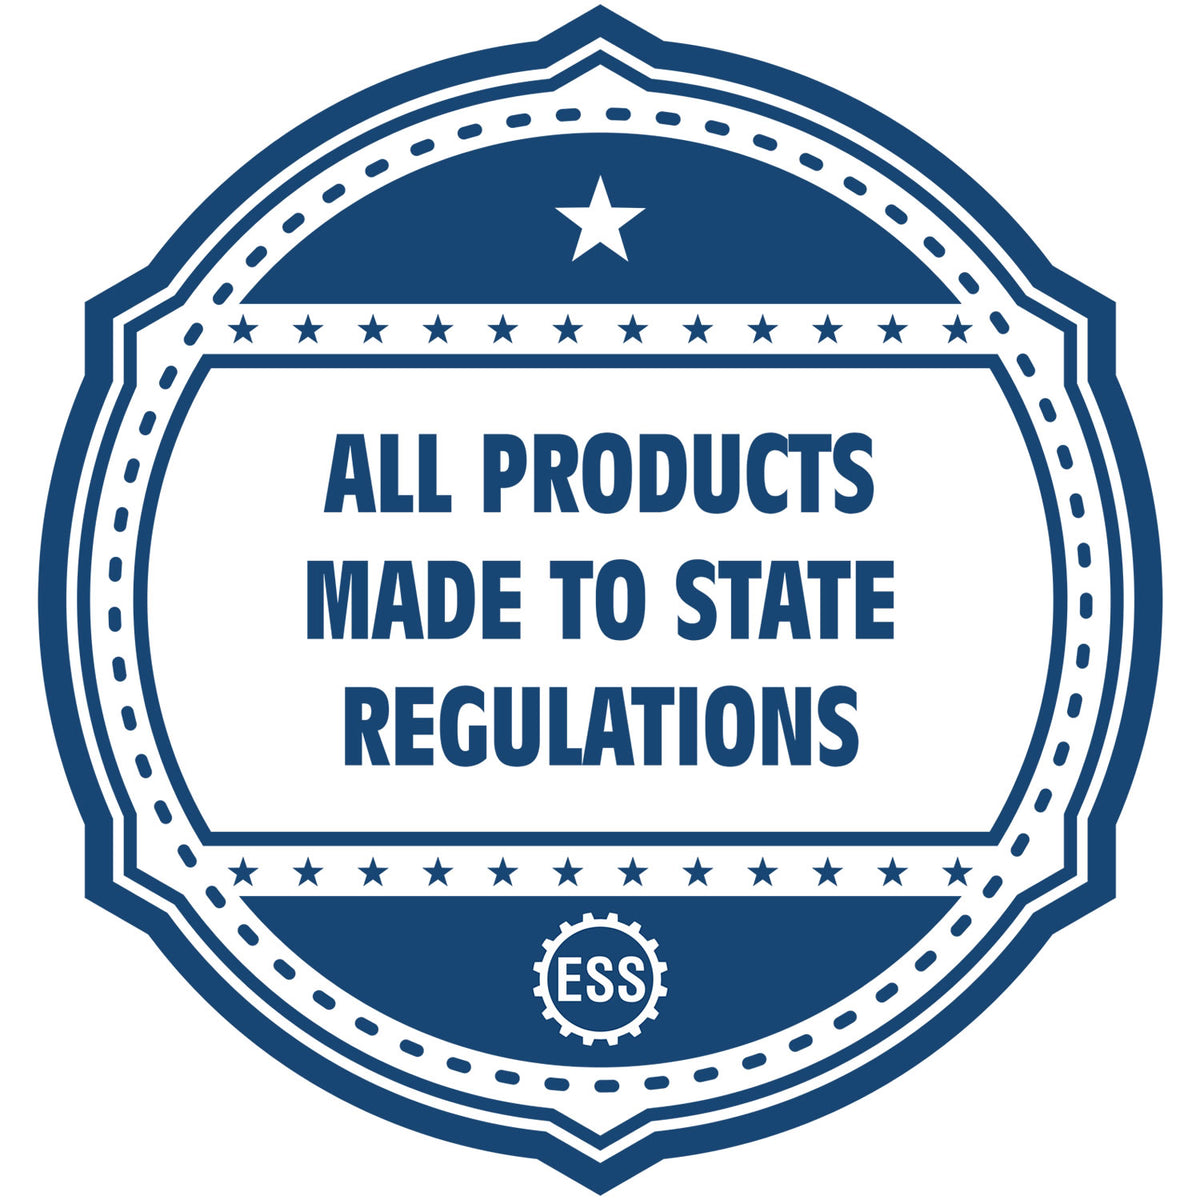 A blue icon or badge for the Gift Kansas Landscape Architect Seal showing that this product is made in compliance with state regulations.